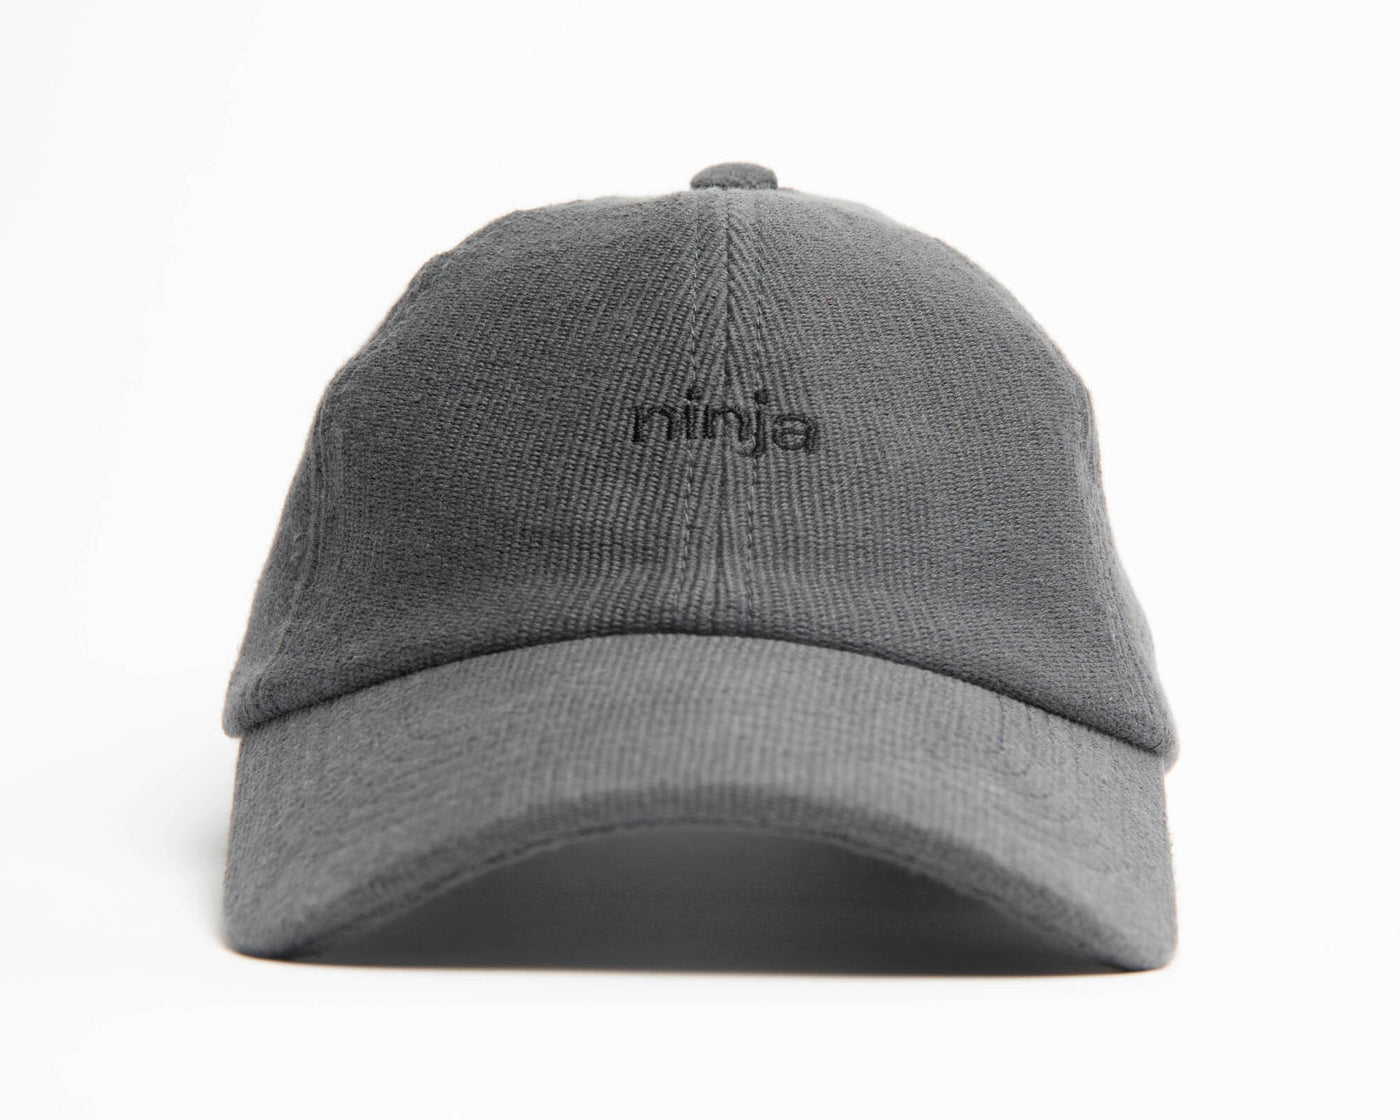 A graphite ninja cap from the NIP X Stiksen merch collaboration, featuring the Ninjas in Pyjamas nickname subtly embroidered on the front. This stylish and adjustable cap is perfect for showcasing your support for NIP in a sleek and trendy way.